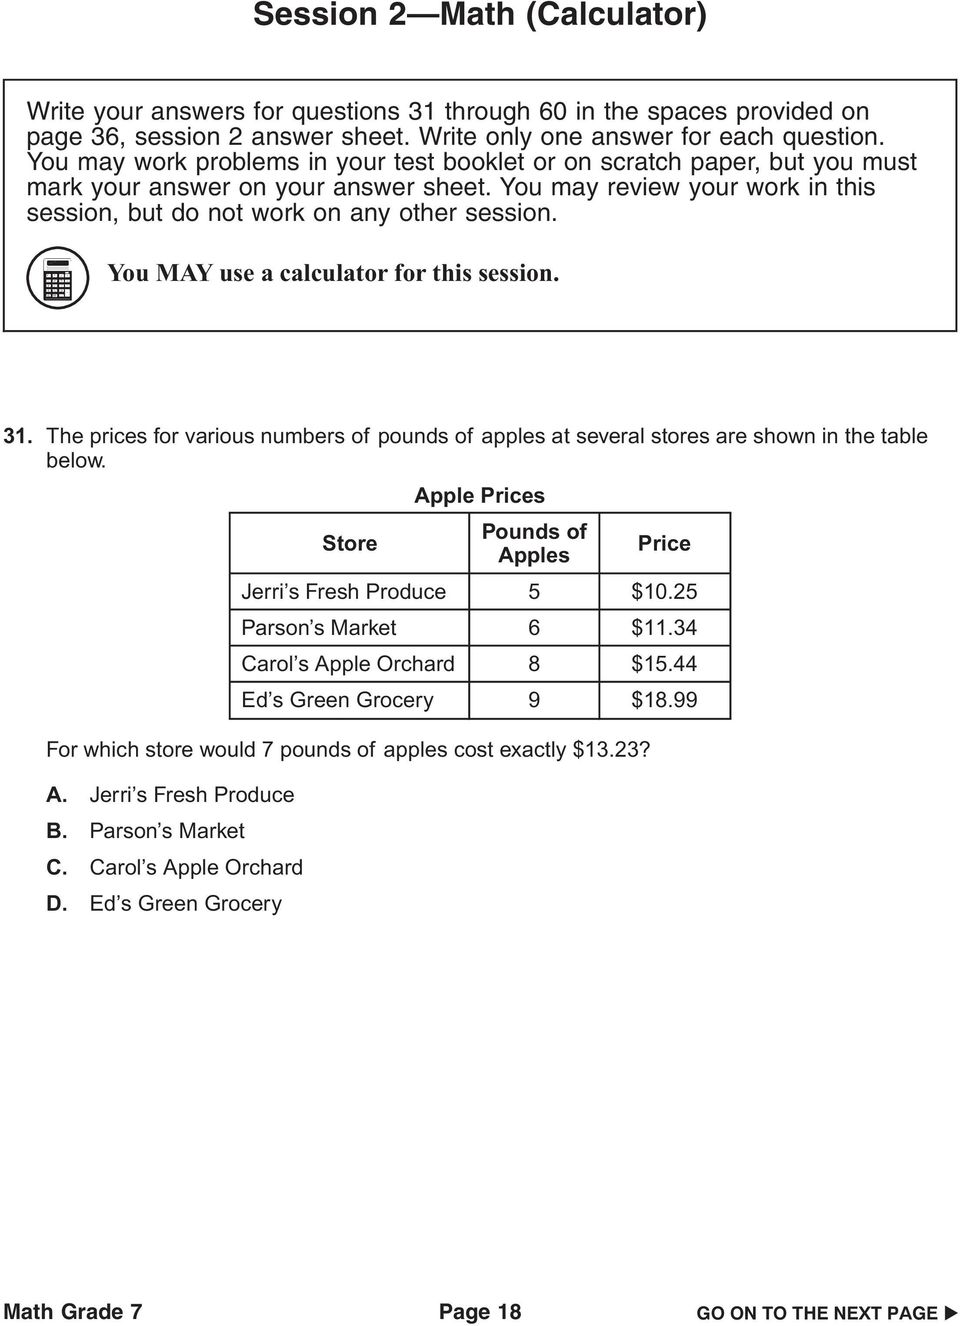 You MAY use a calculator for this session. 31. The prices for various numbers of pounds of apples at several stores are shown in the table below.